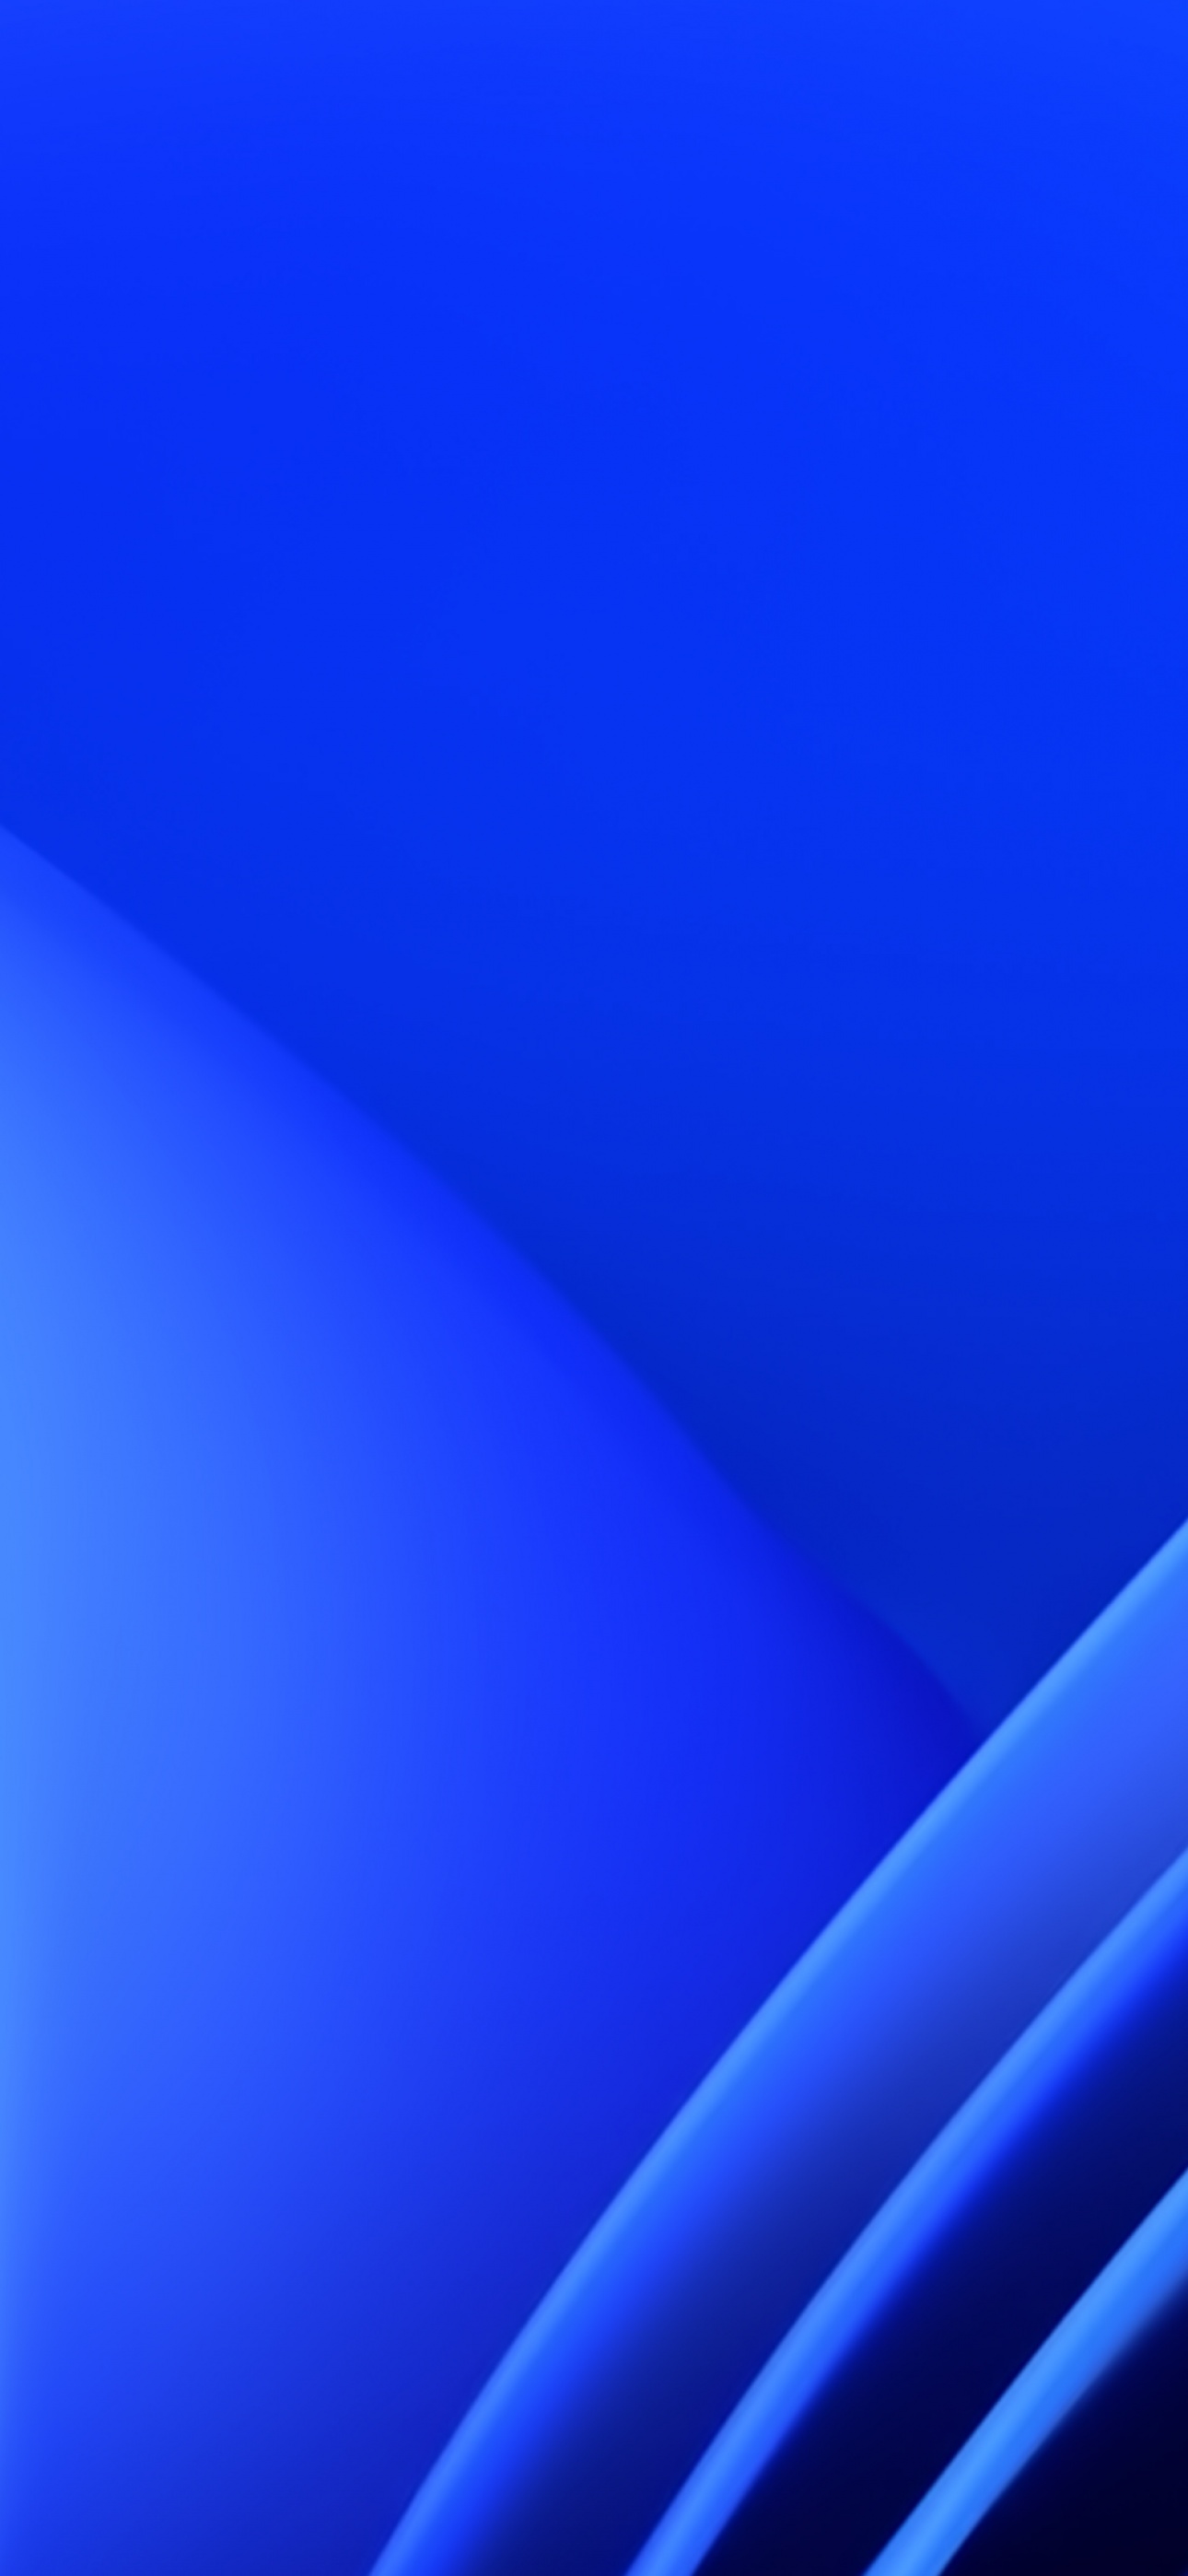 Windows 11 Wallpaper 4K, Blue, Stock, Official, Abstract, #5656